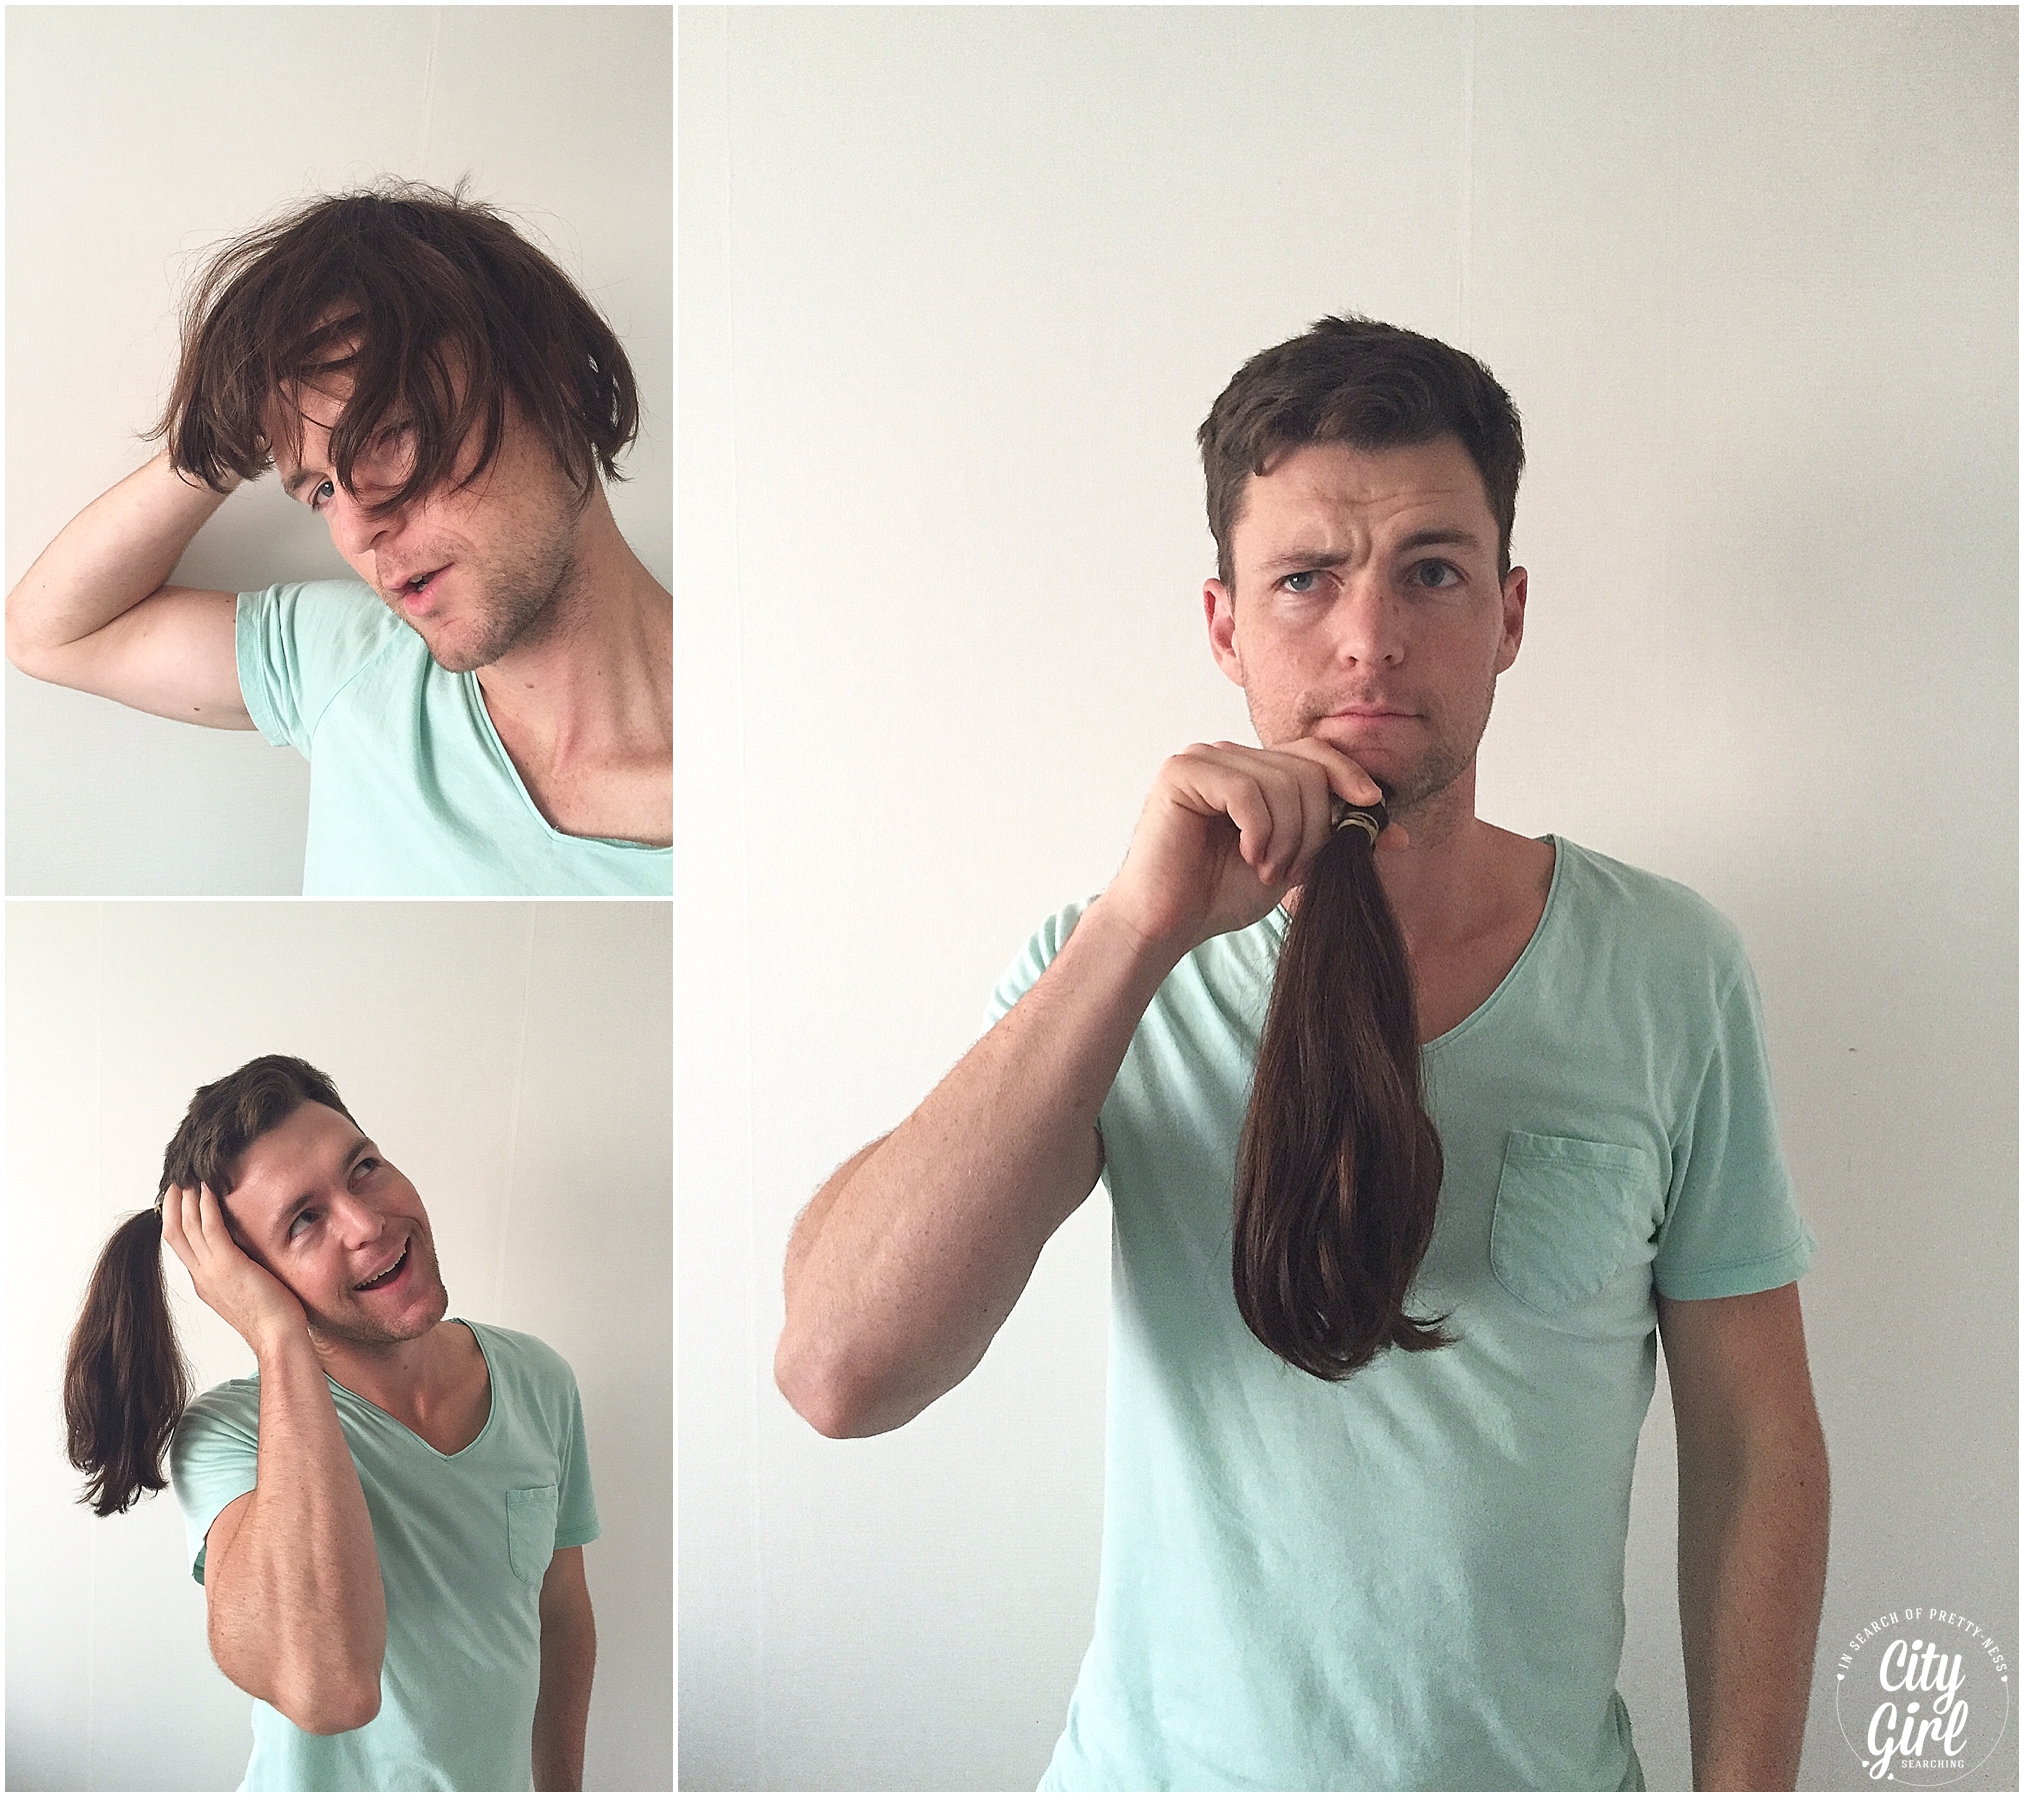 Chopping off your locks - Donating your hair to Charity in Korea —  CityGirlSearching